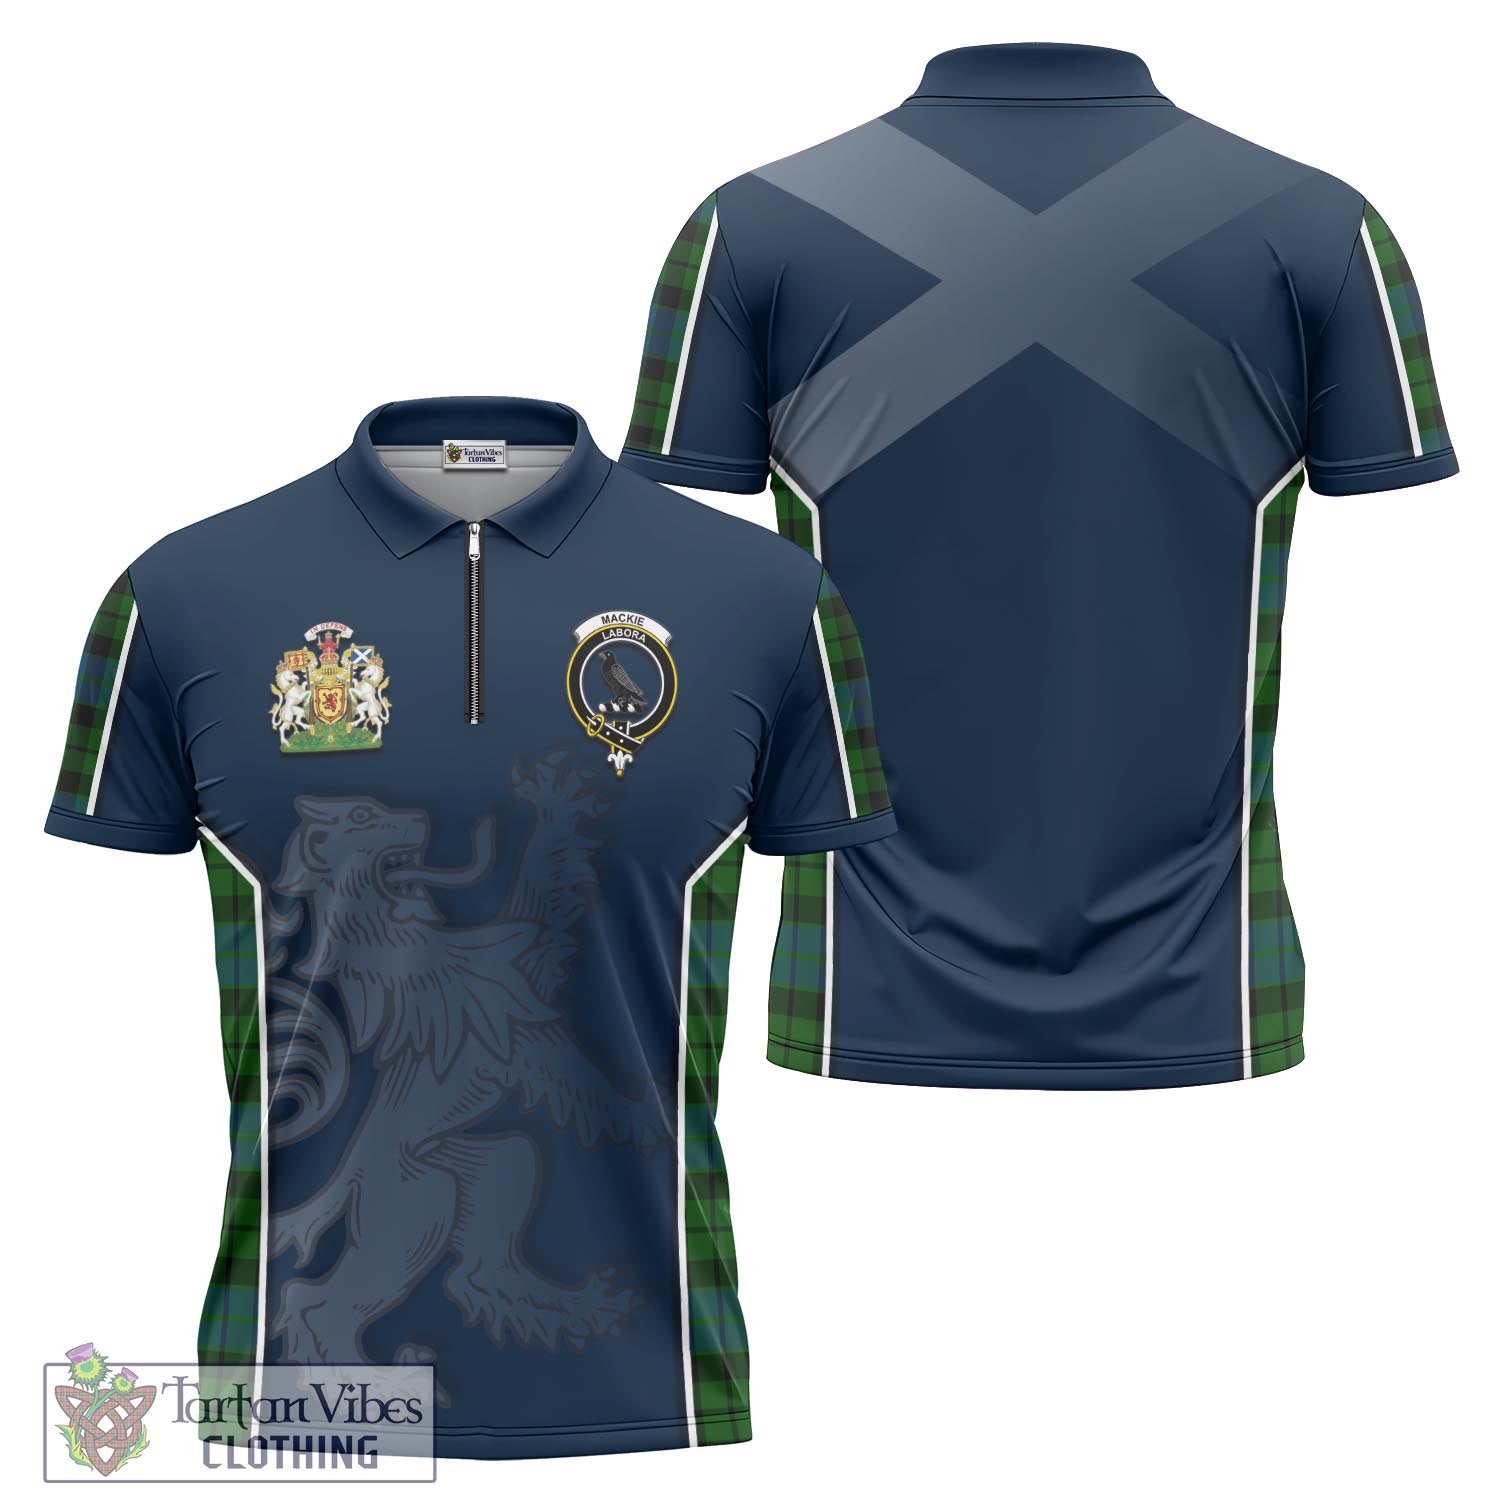 Tartan Vibes Clothing MacKie Tartan Zipper Polo Shirt with Family Crest and Lion Rampant Vibes Sport Style